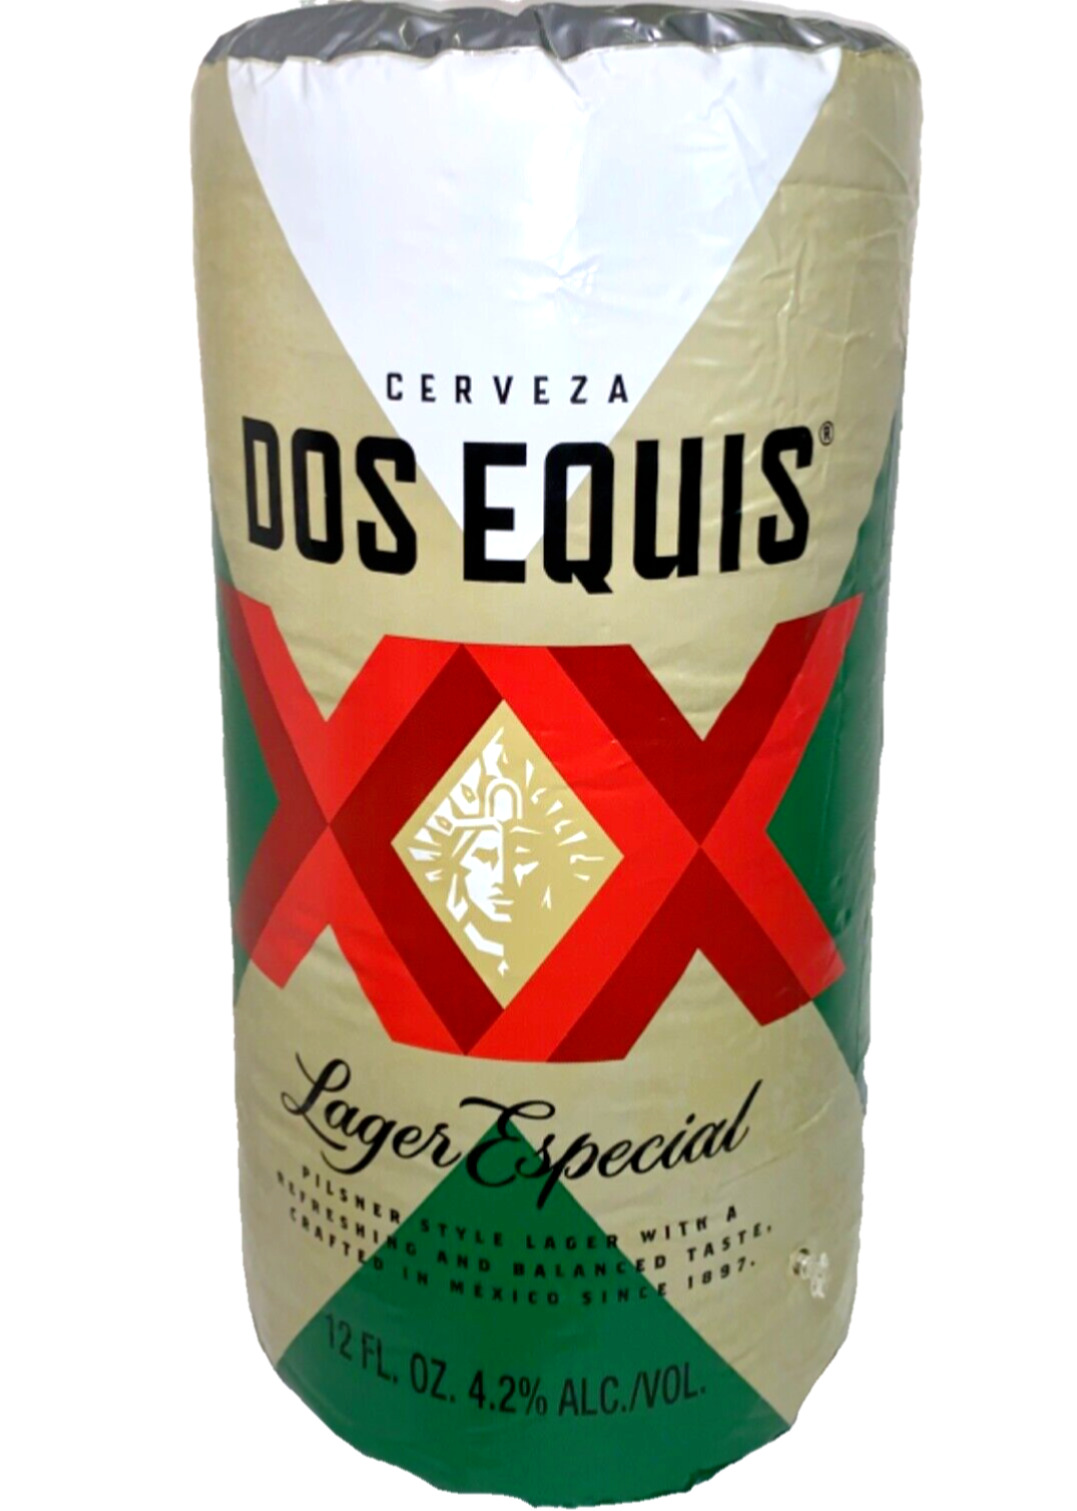 Dos Equis XX Hanging Inflatable Beer Can 32”Tall x 14”Wide Man Cave Bar Decor